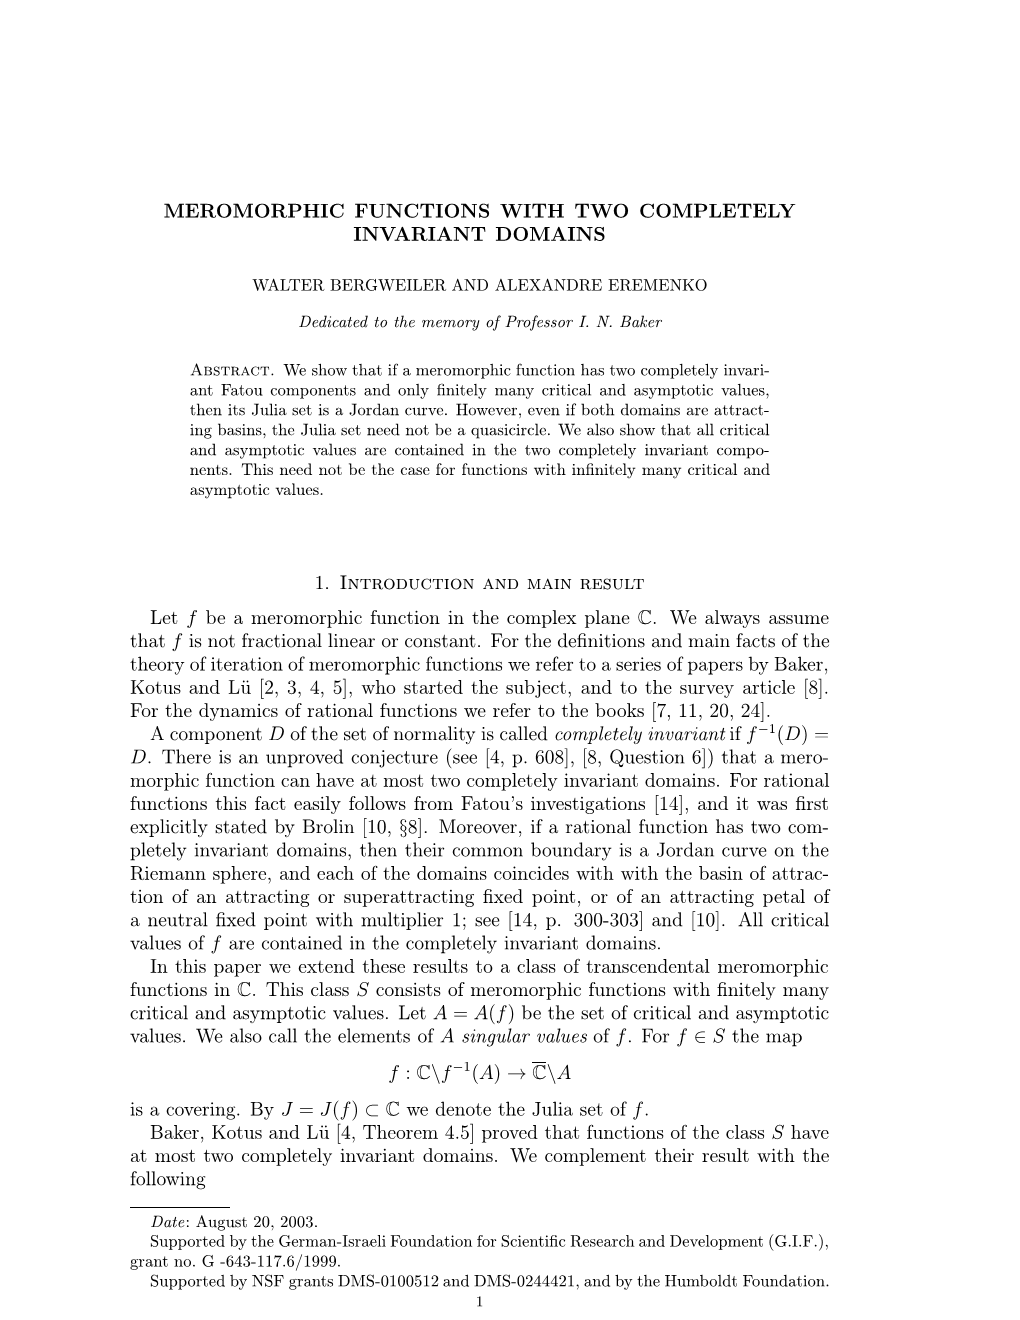 Meromorphic Functions with Two Completely Invariant Domains